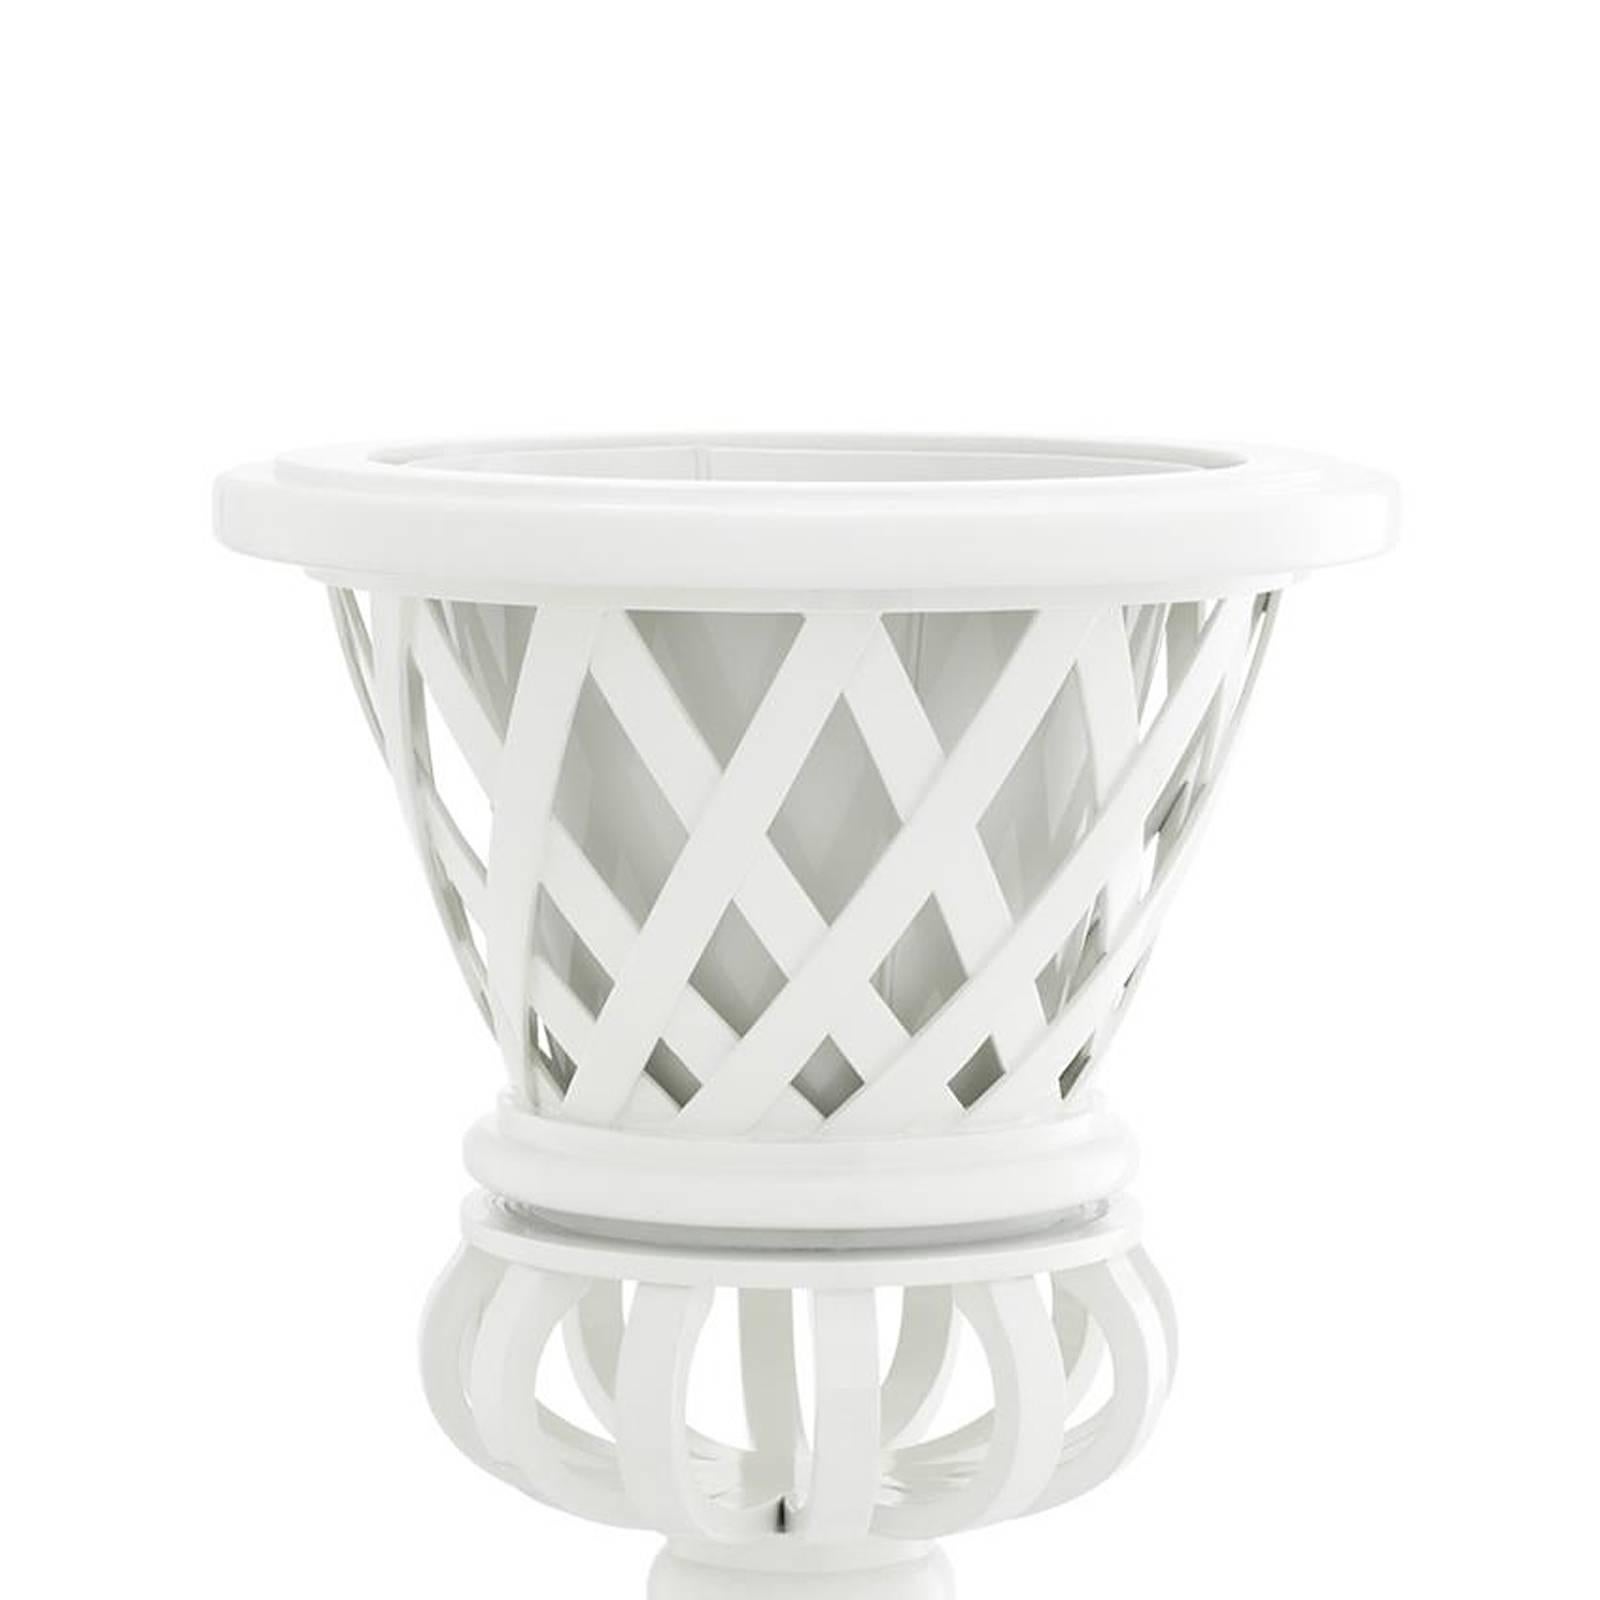 Planter garden white made with solid mahogany wood
and iron in piano black finish including removable inlay.
Also available in black mahogany wood black finish.
